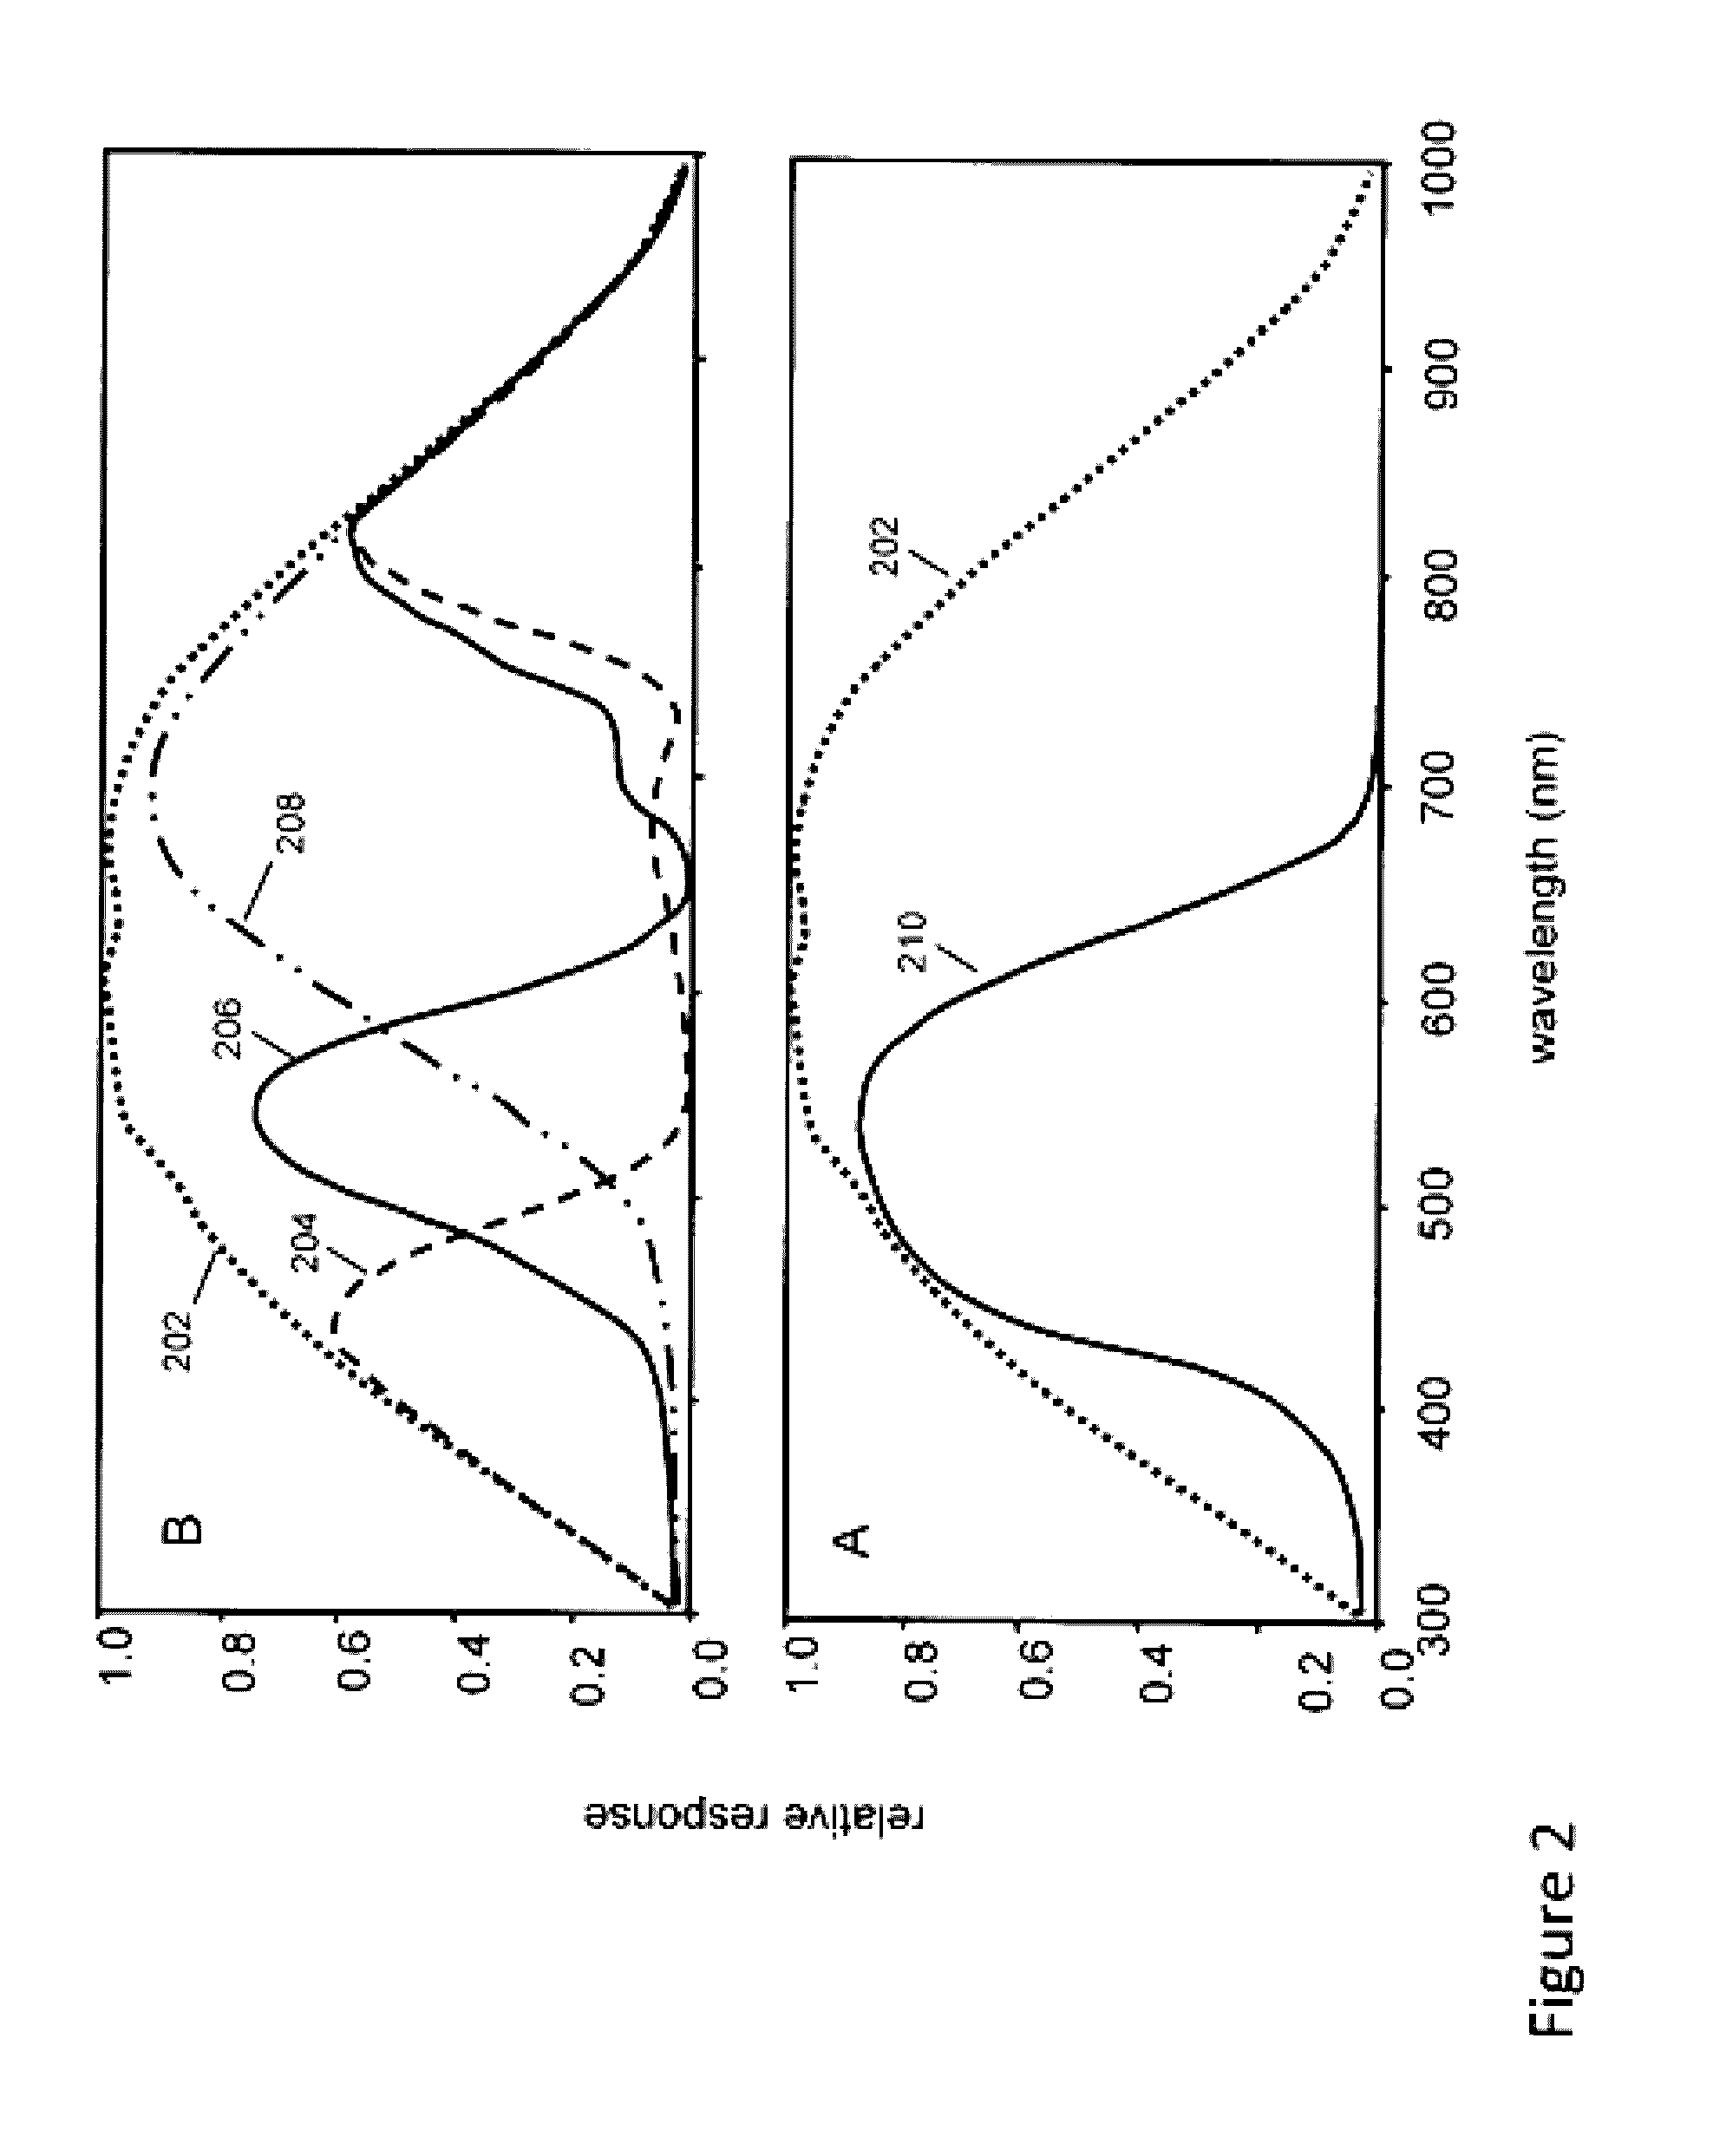 Processing Multi-Aperture Image Data for a Compound Imaging System